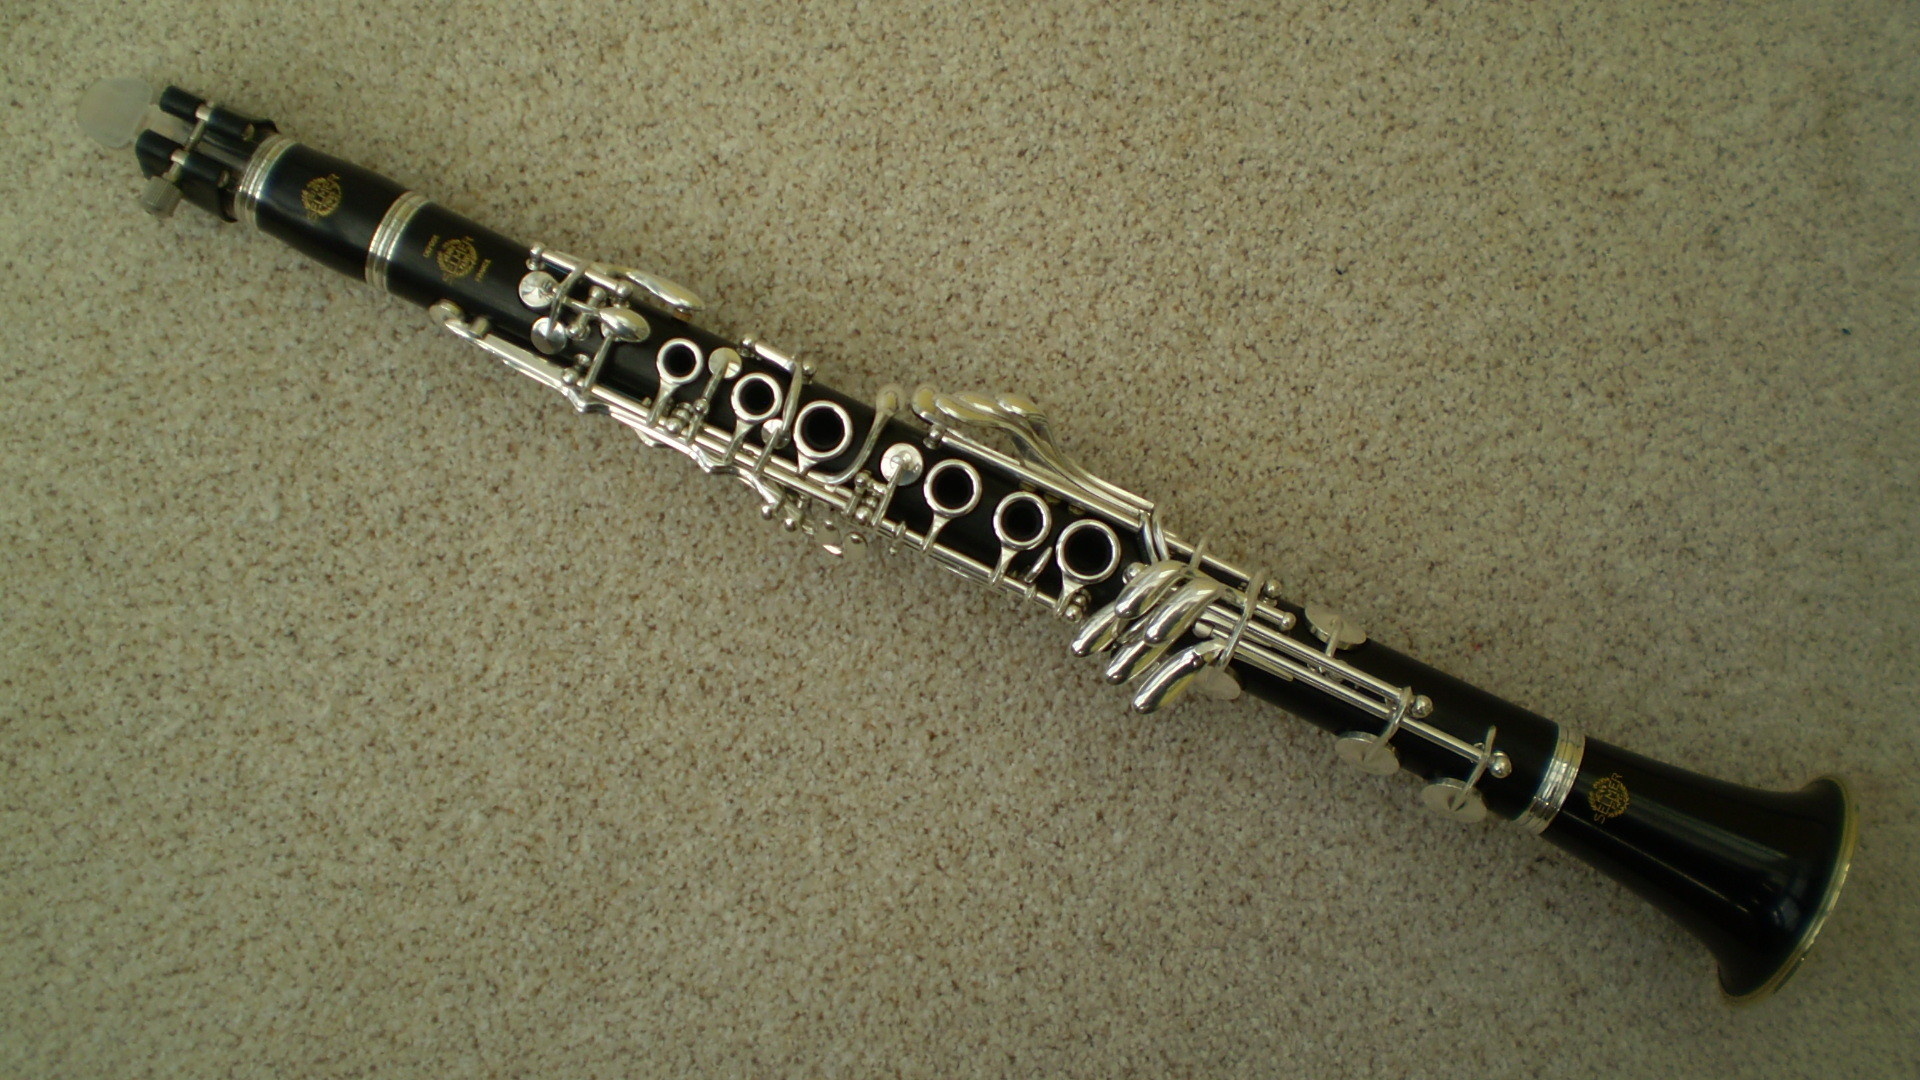 Clarinet: The musical woodwind instrument, Construction of five parts: Mouthpiece, Barrel, Upper joint, Lower joint, Bell. 1920x1080 Full HD Wallpaper.